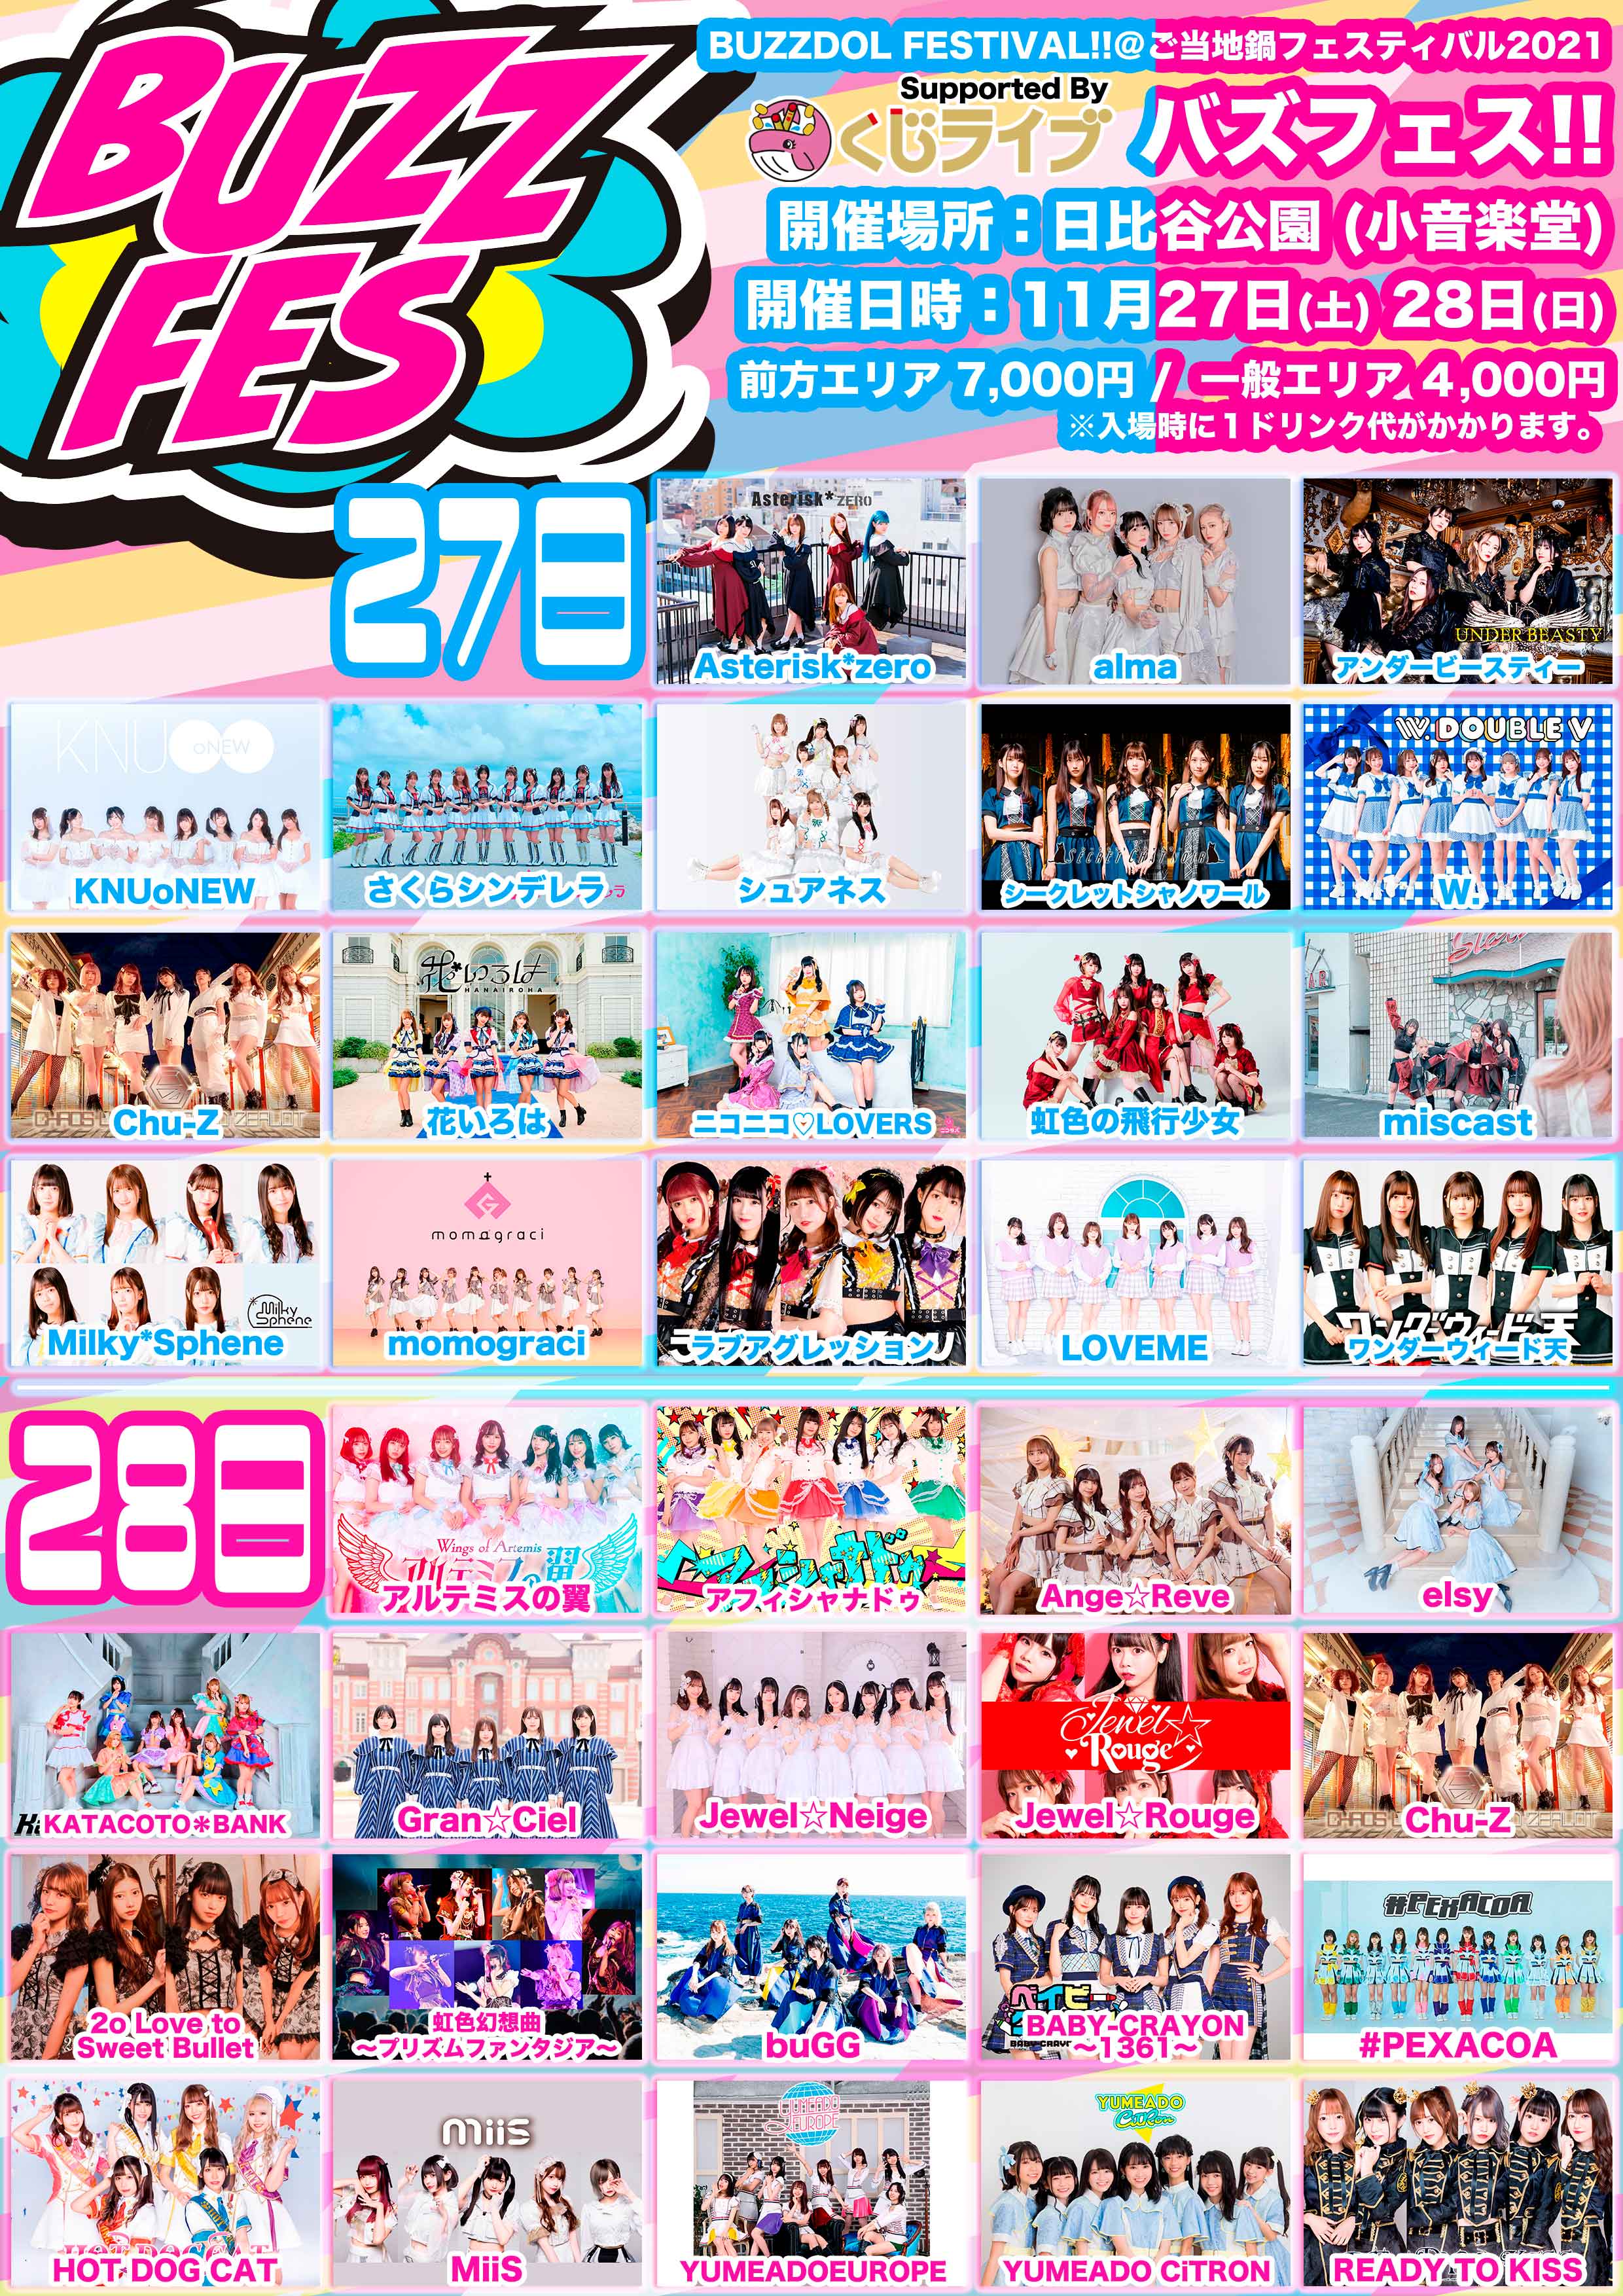 ≪BUZZDOL FESTIVAL!!＠ご当地鍋フェスティバル2021 Supported By くじライブ≫-バズフェス!!-